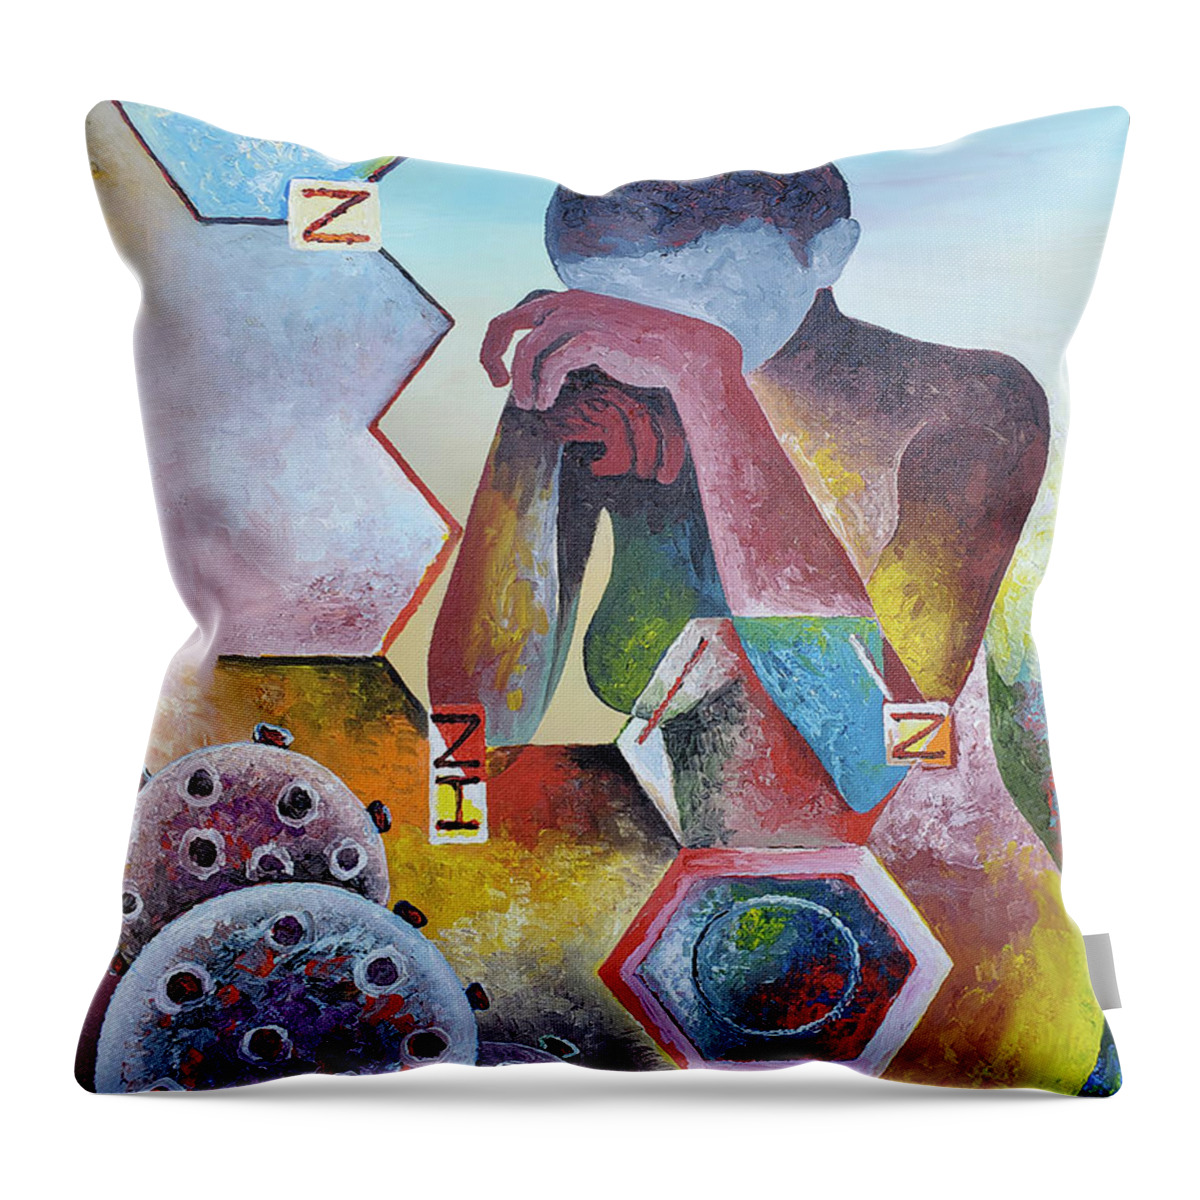 Covid-19 Throw Pillow featuring the painting Hydroxychloroquine - The Covid-19 Debacle by Obi-Tabot Tabe